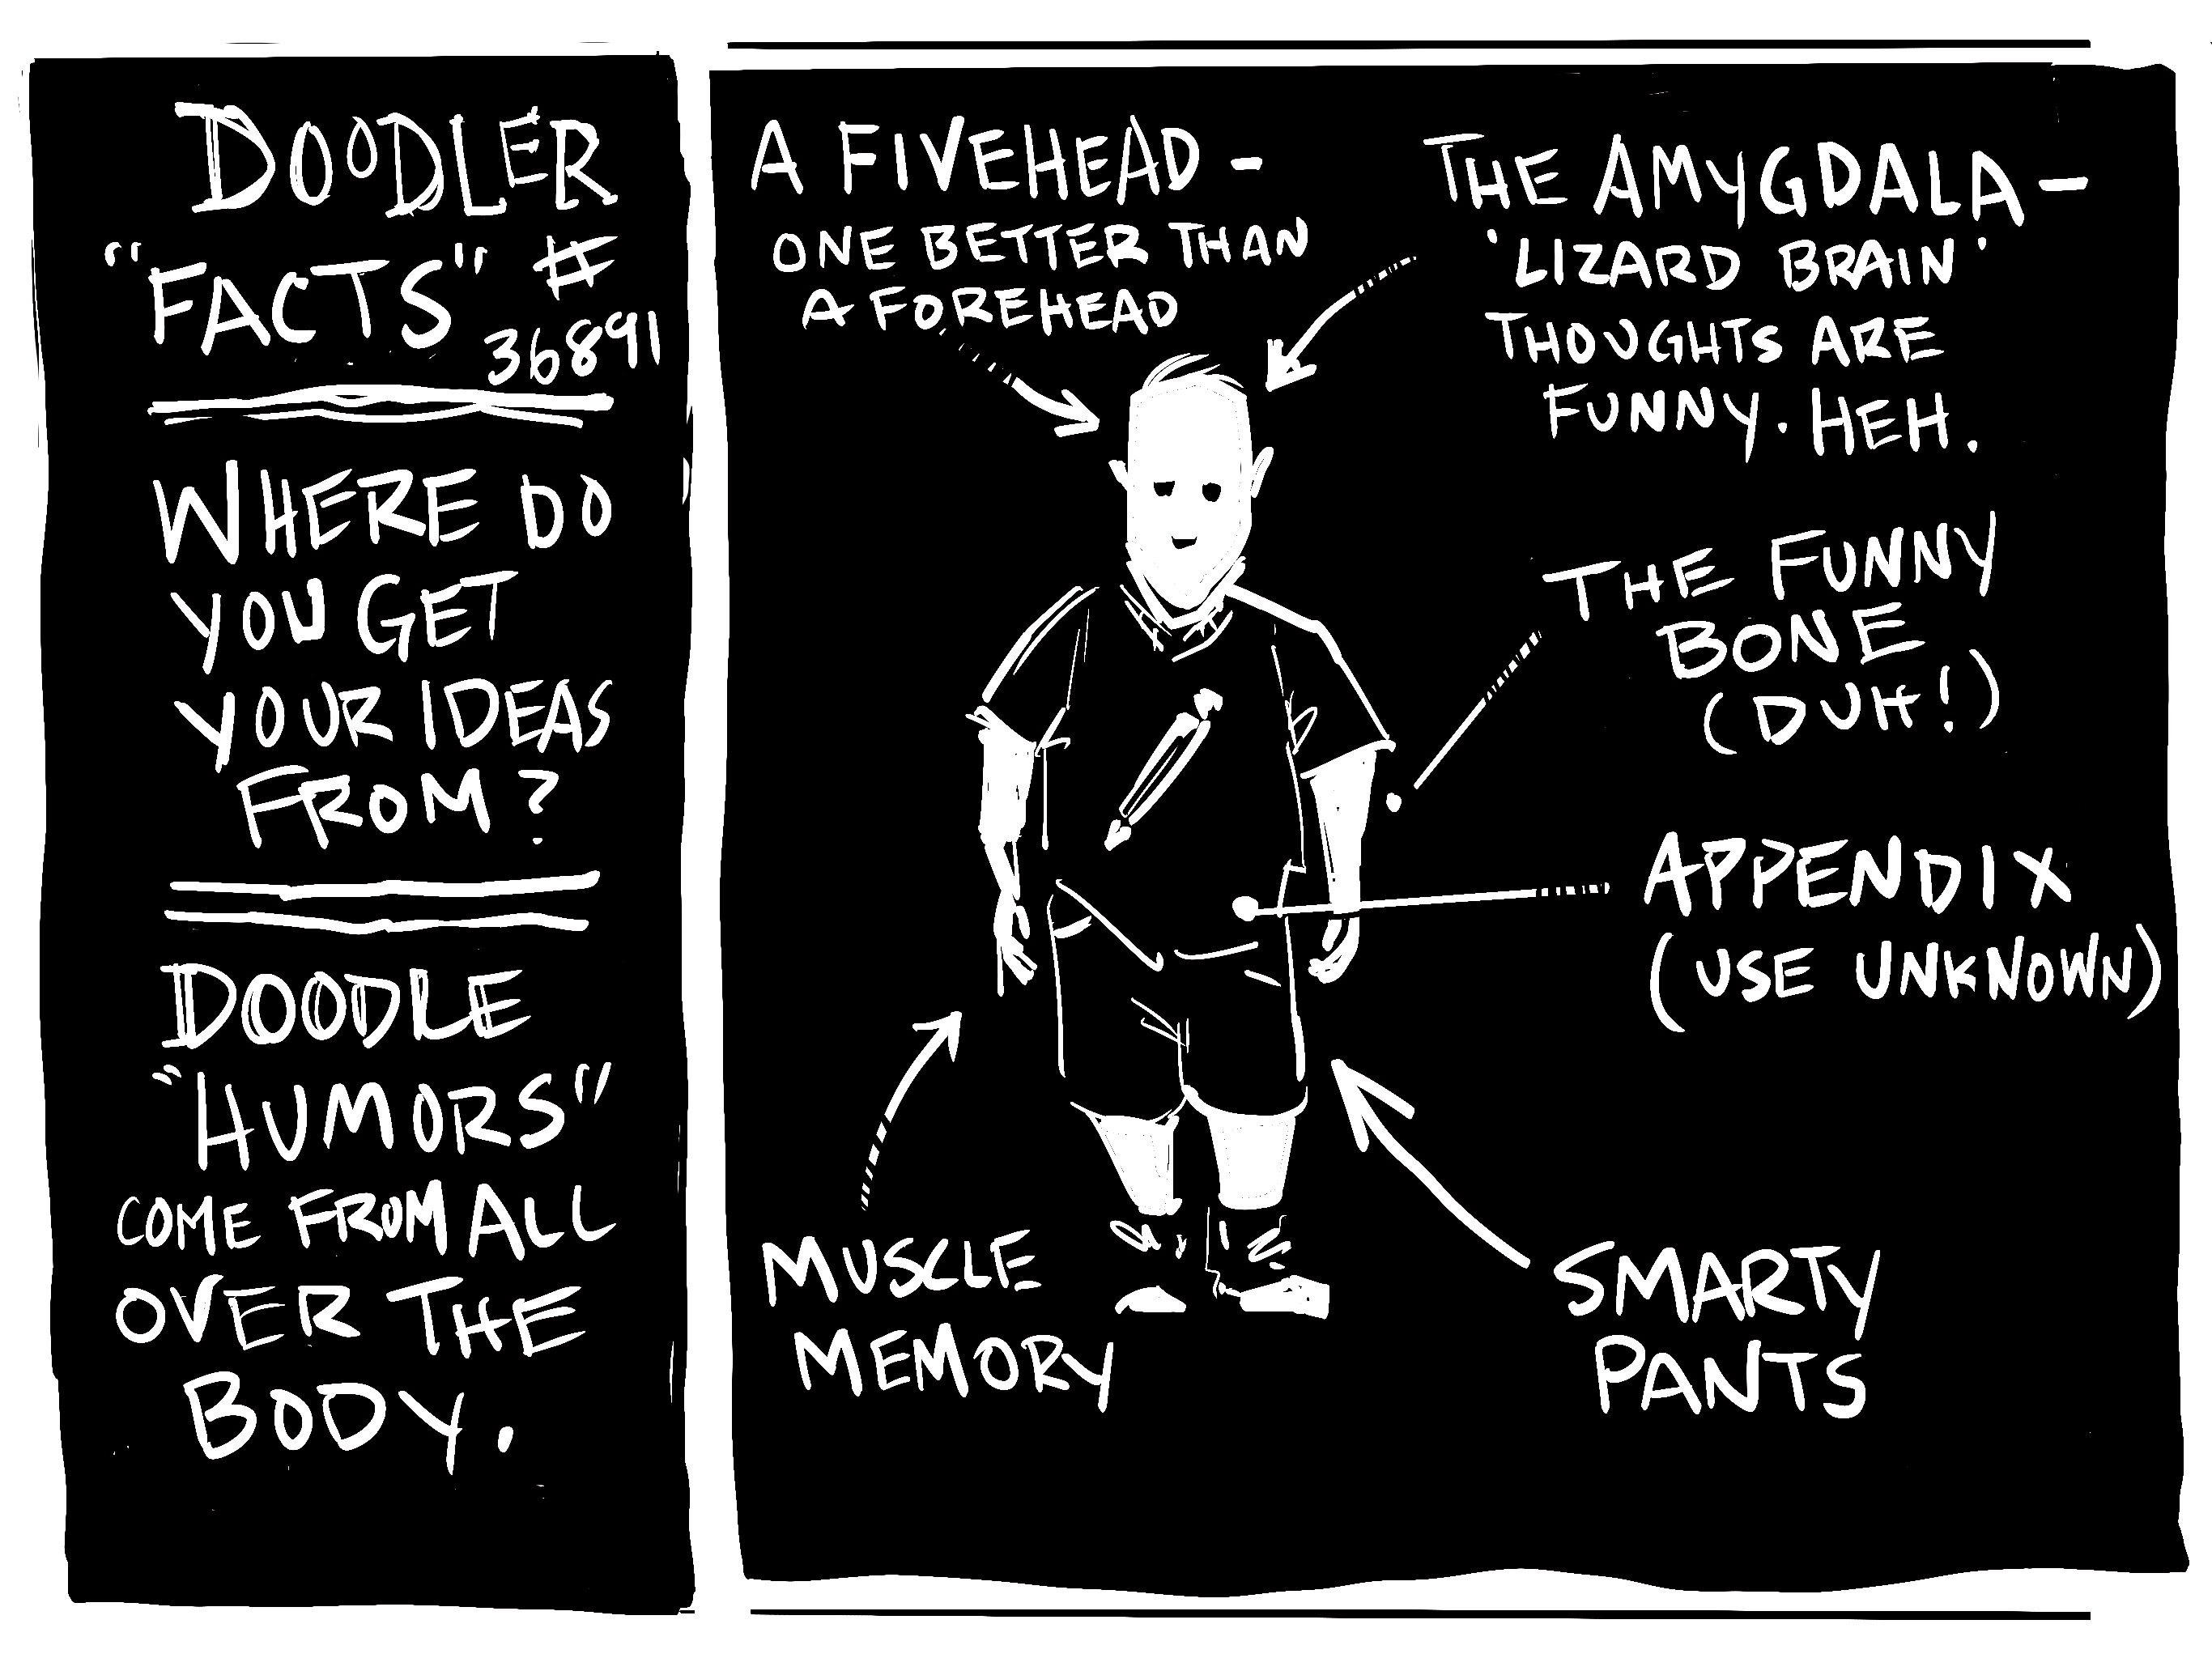 Digital sketch of Doodler and where his ideas come from. Funny bone, appendix, smarty pants, muscle memory, a five head, and the amygdala